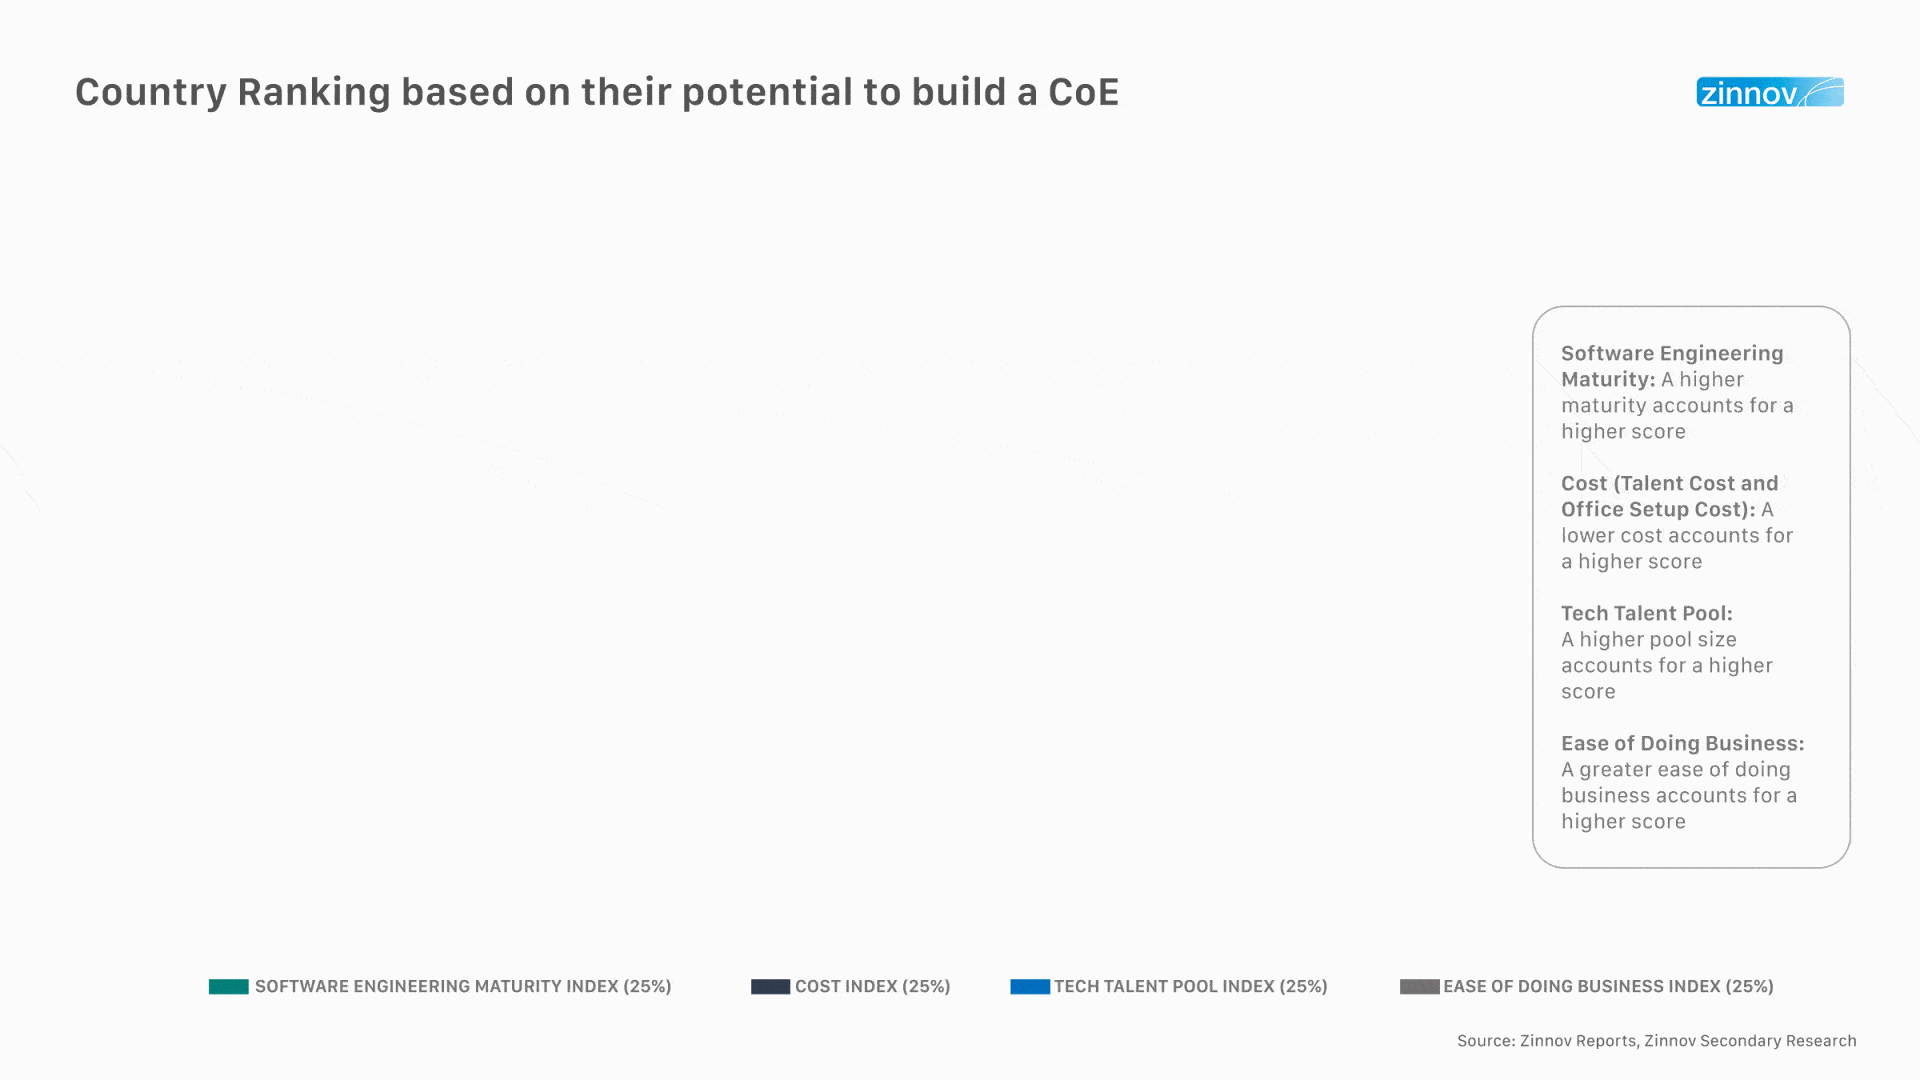 Country ranking based on their potential to build a coe